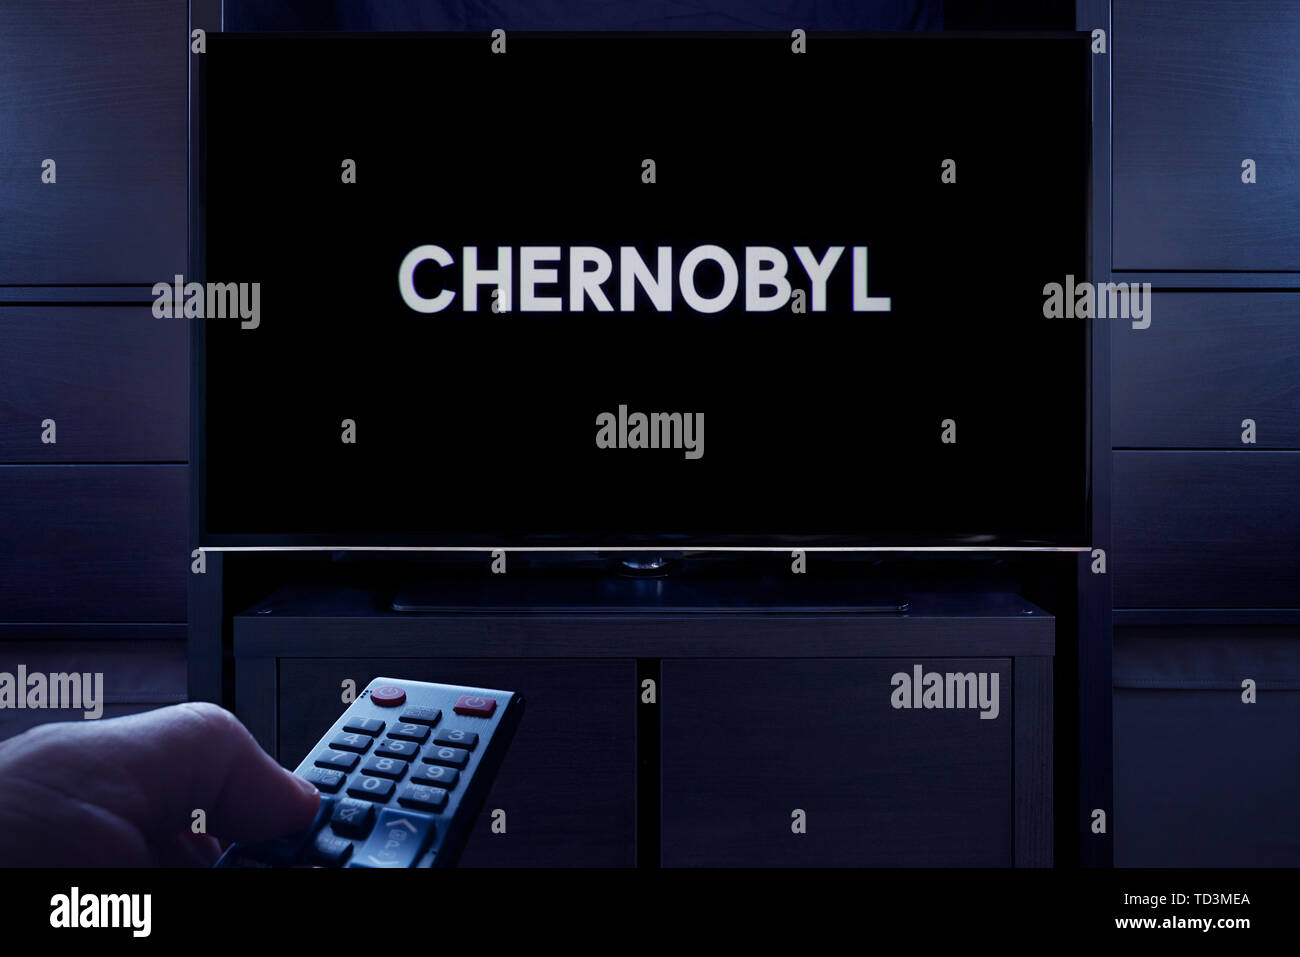 A man points a TV remote at the television which displays the Chernobyl main title screen (Editorial use only). Stock Photo